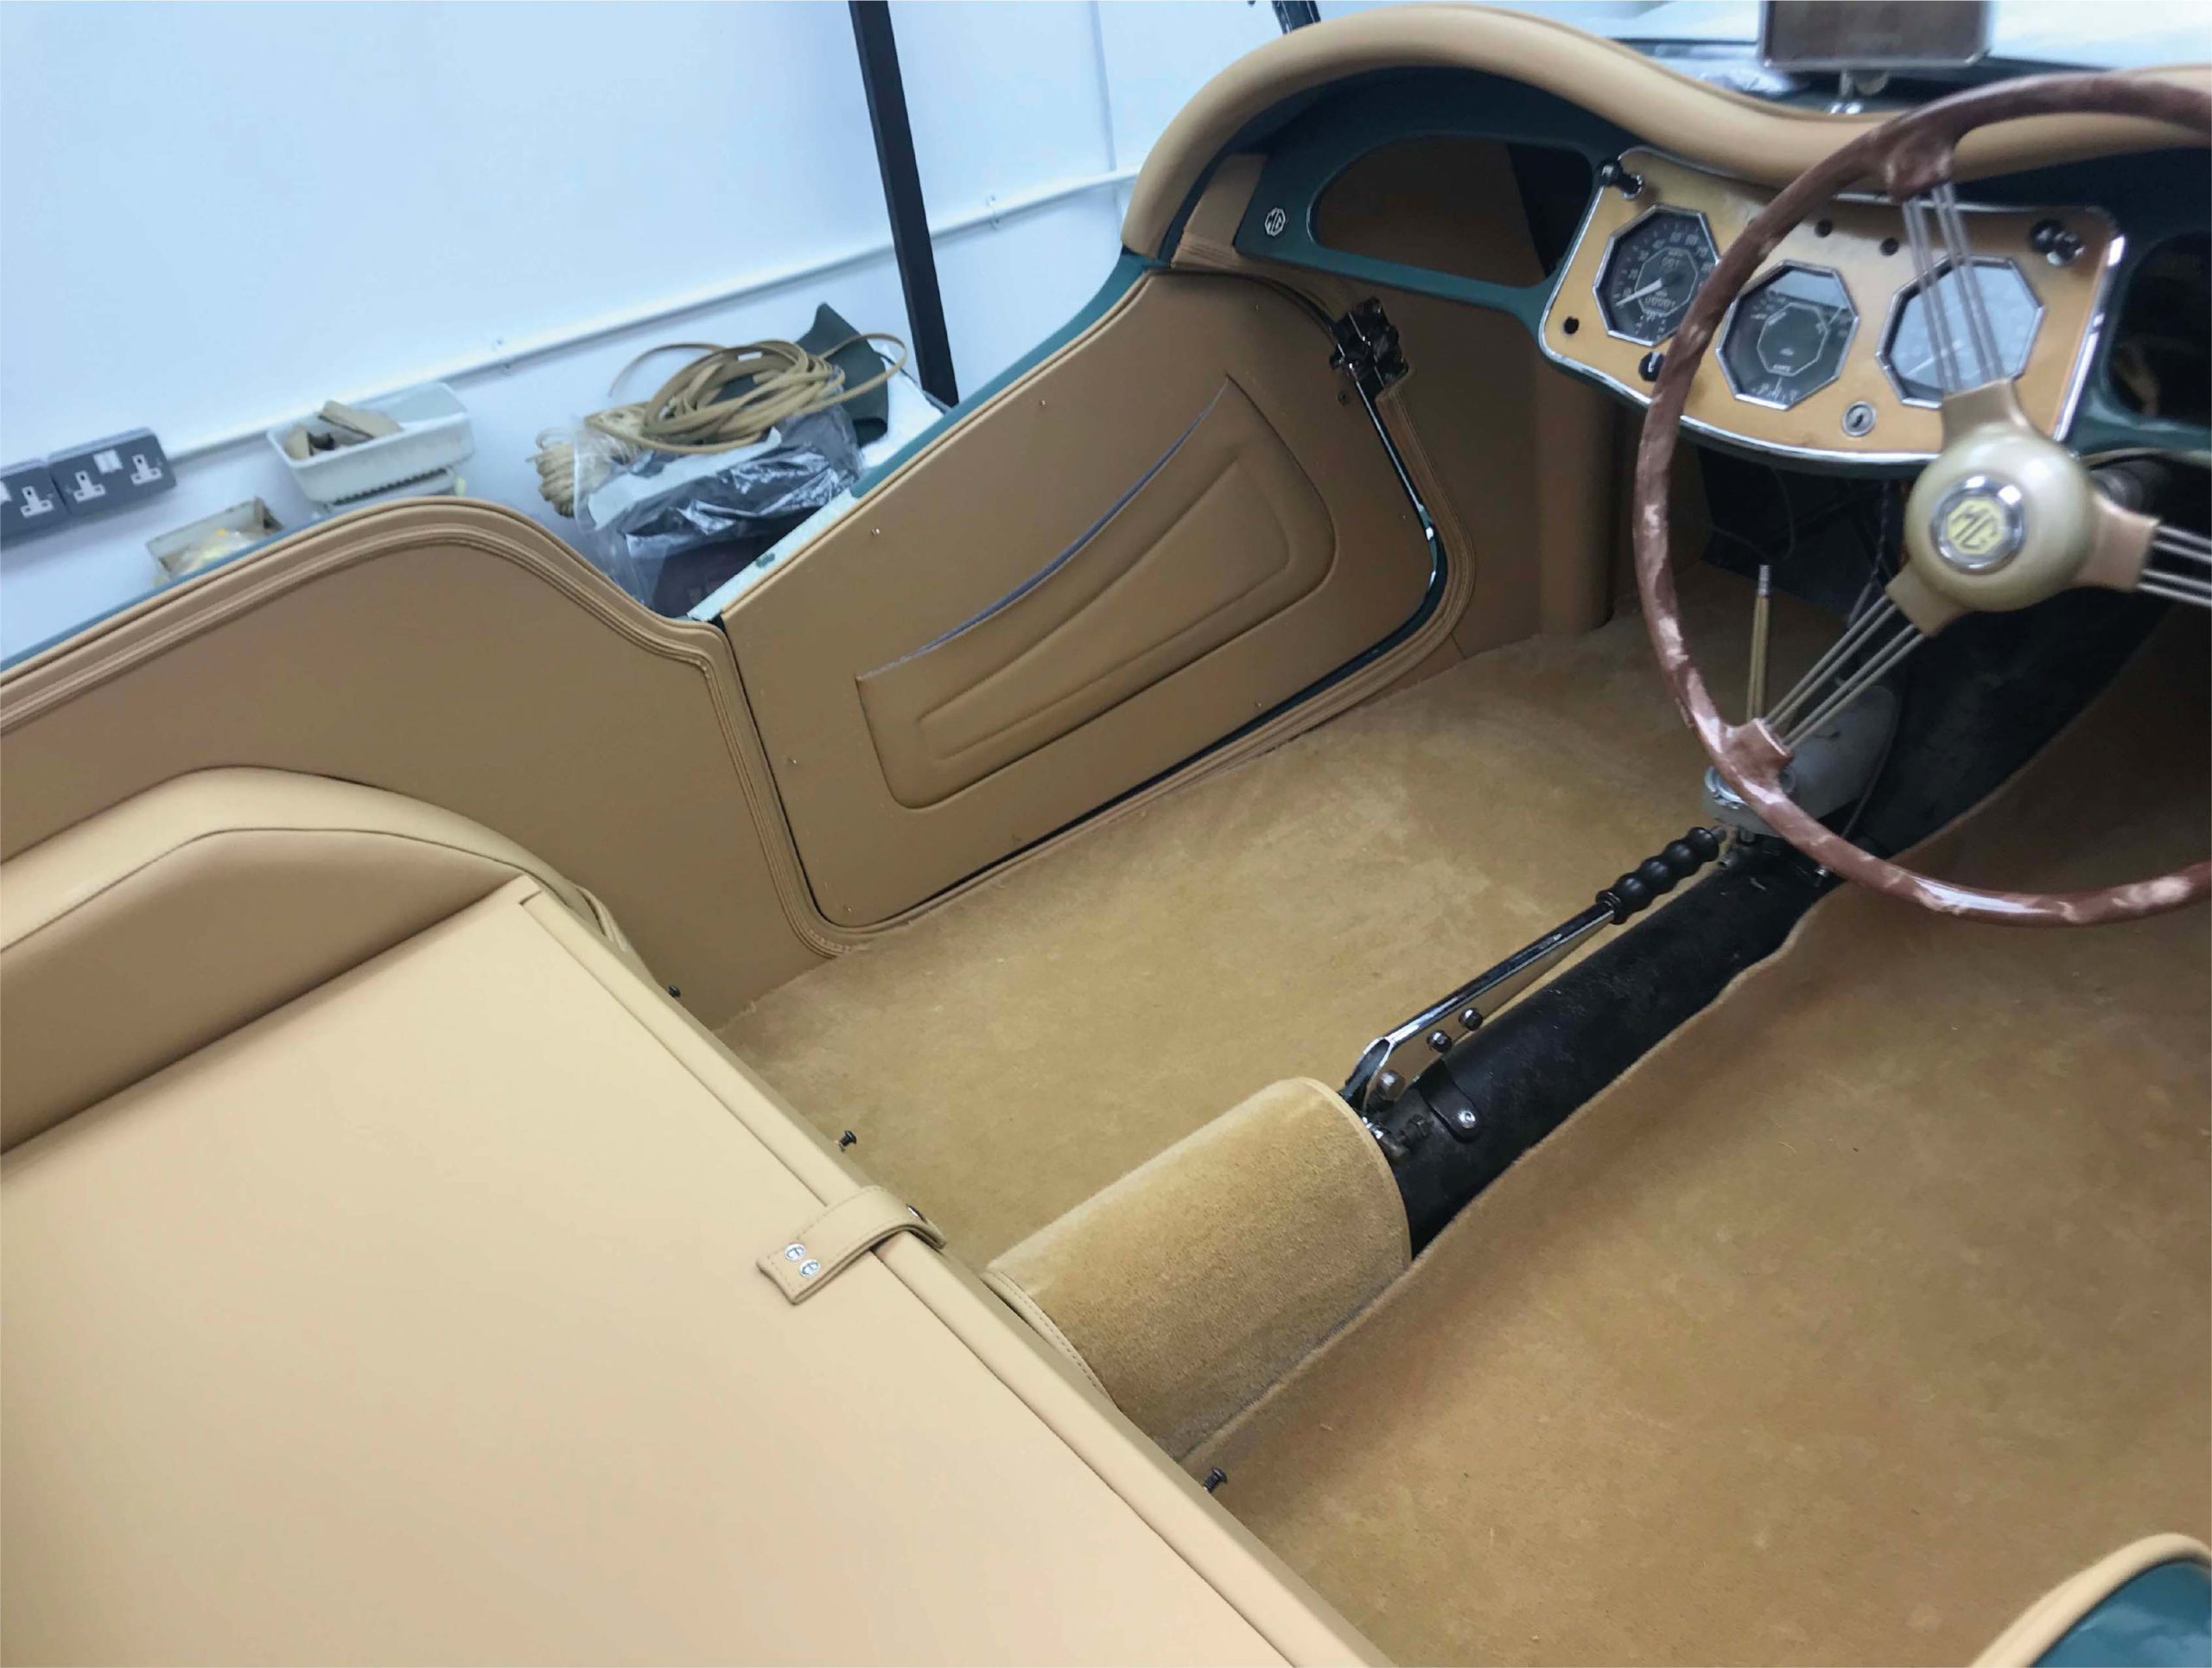 Inside of an MG car with a stripped interior